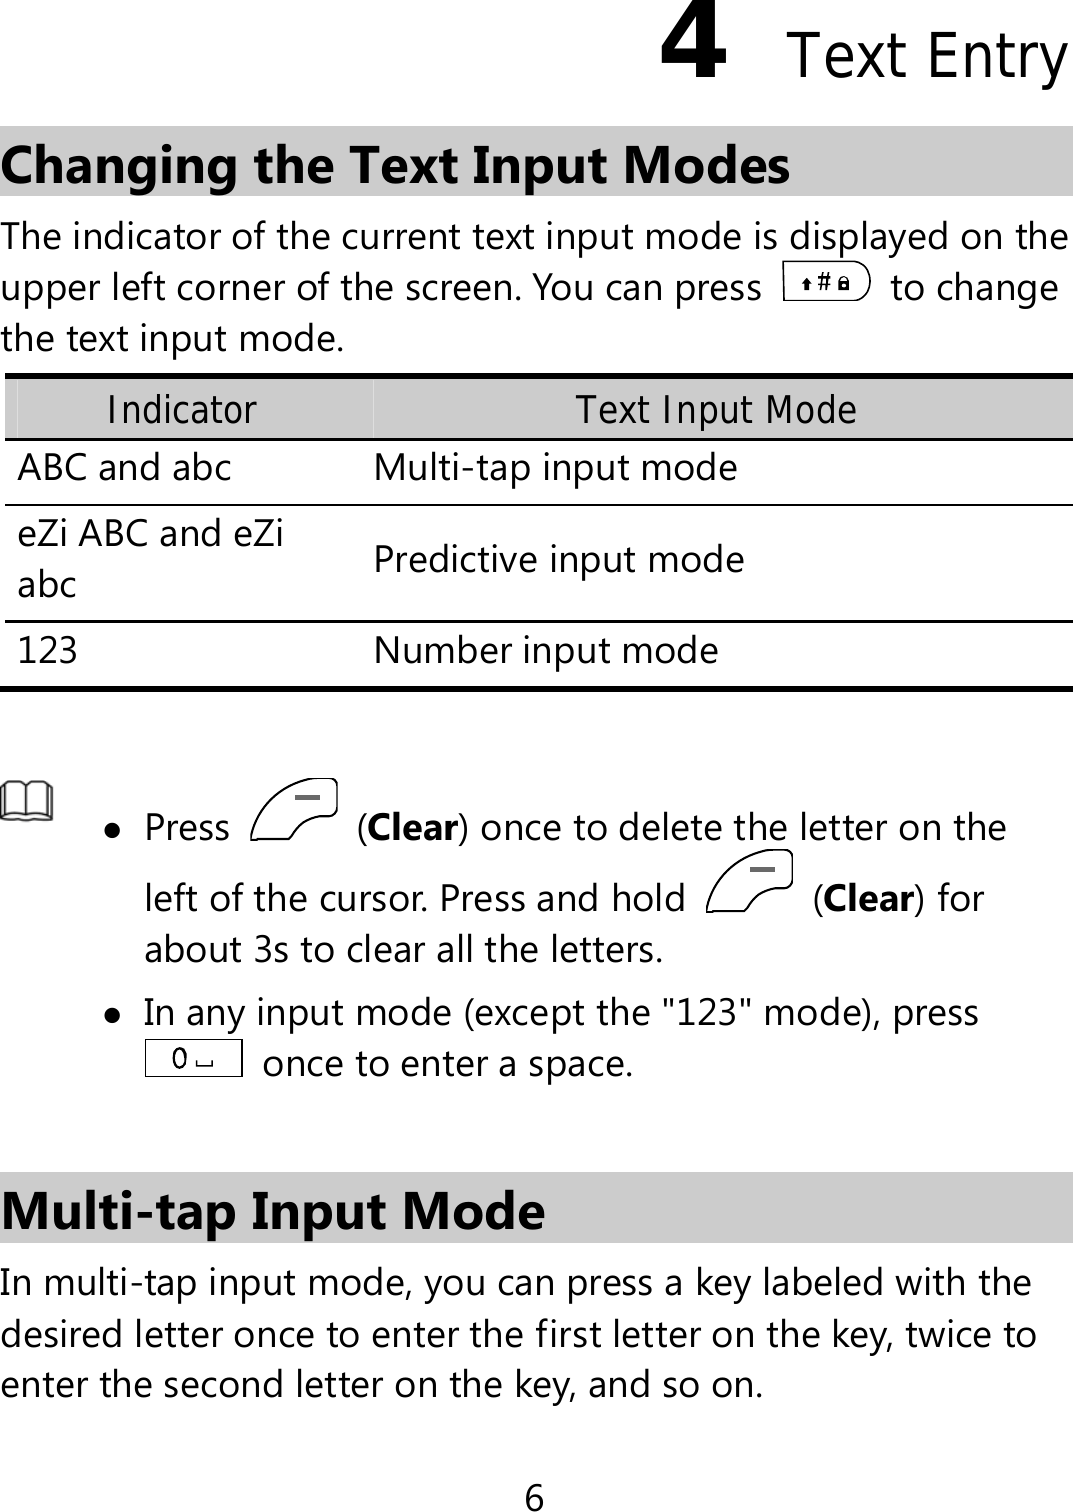 6 4  Text Entry Changing the Text Input Modes The indicator of the current text input mode is displayed on the upper left corner of the screen. You can press   to change the text input mode. Indicator Text Input Mode ABC and abc  Multi-tap input modeeZi ABC and eZi abc  Predictive input mode 123 Number input mode   Press   (Clear) once to delete the letter on the left of the cursor. Press and hold   (Clear) for about 3s to clear all the letters.    In any input mode (except the &quot;123&quot; mode), press   once to enter a space.    Multi-tap Input Mode In multi-tap input mode, you can press a key labeled with the desired letter once to enter the first letter on the key, twice to enter the second letter on the key, and so on.   